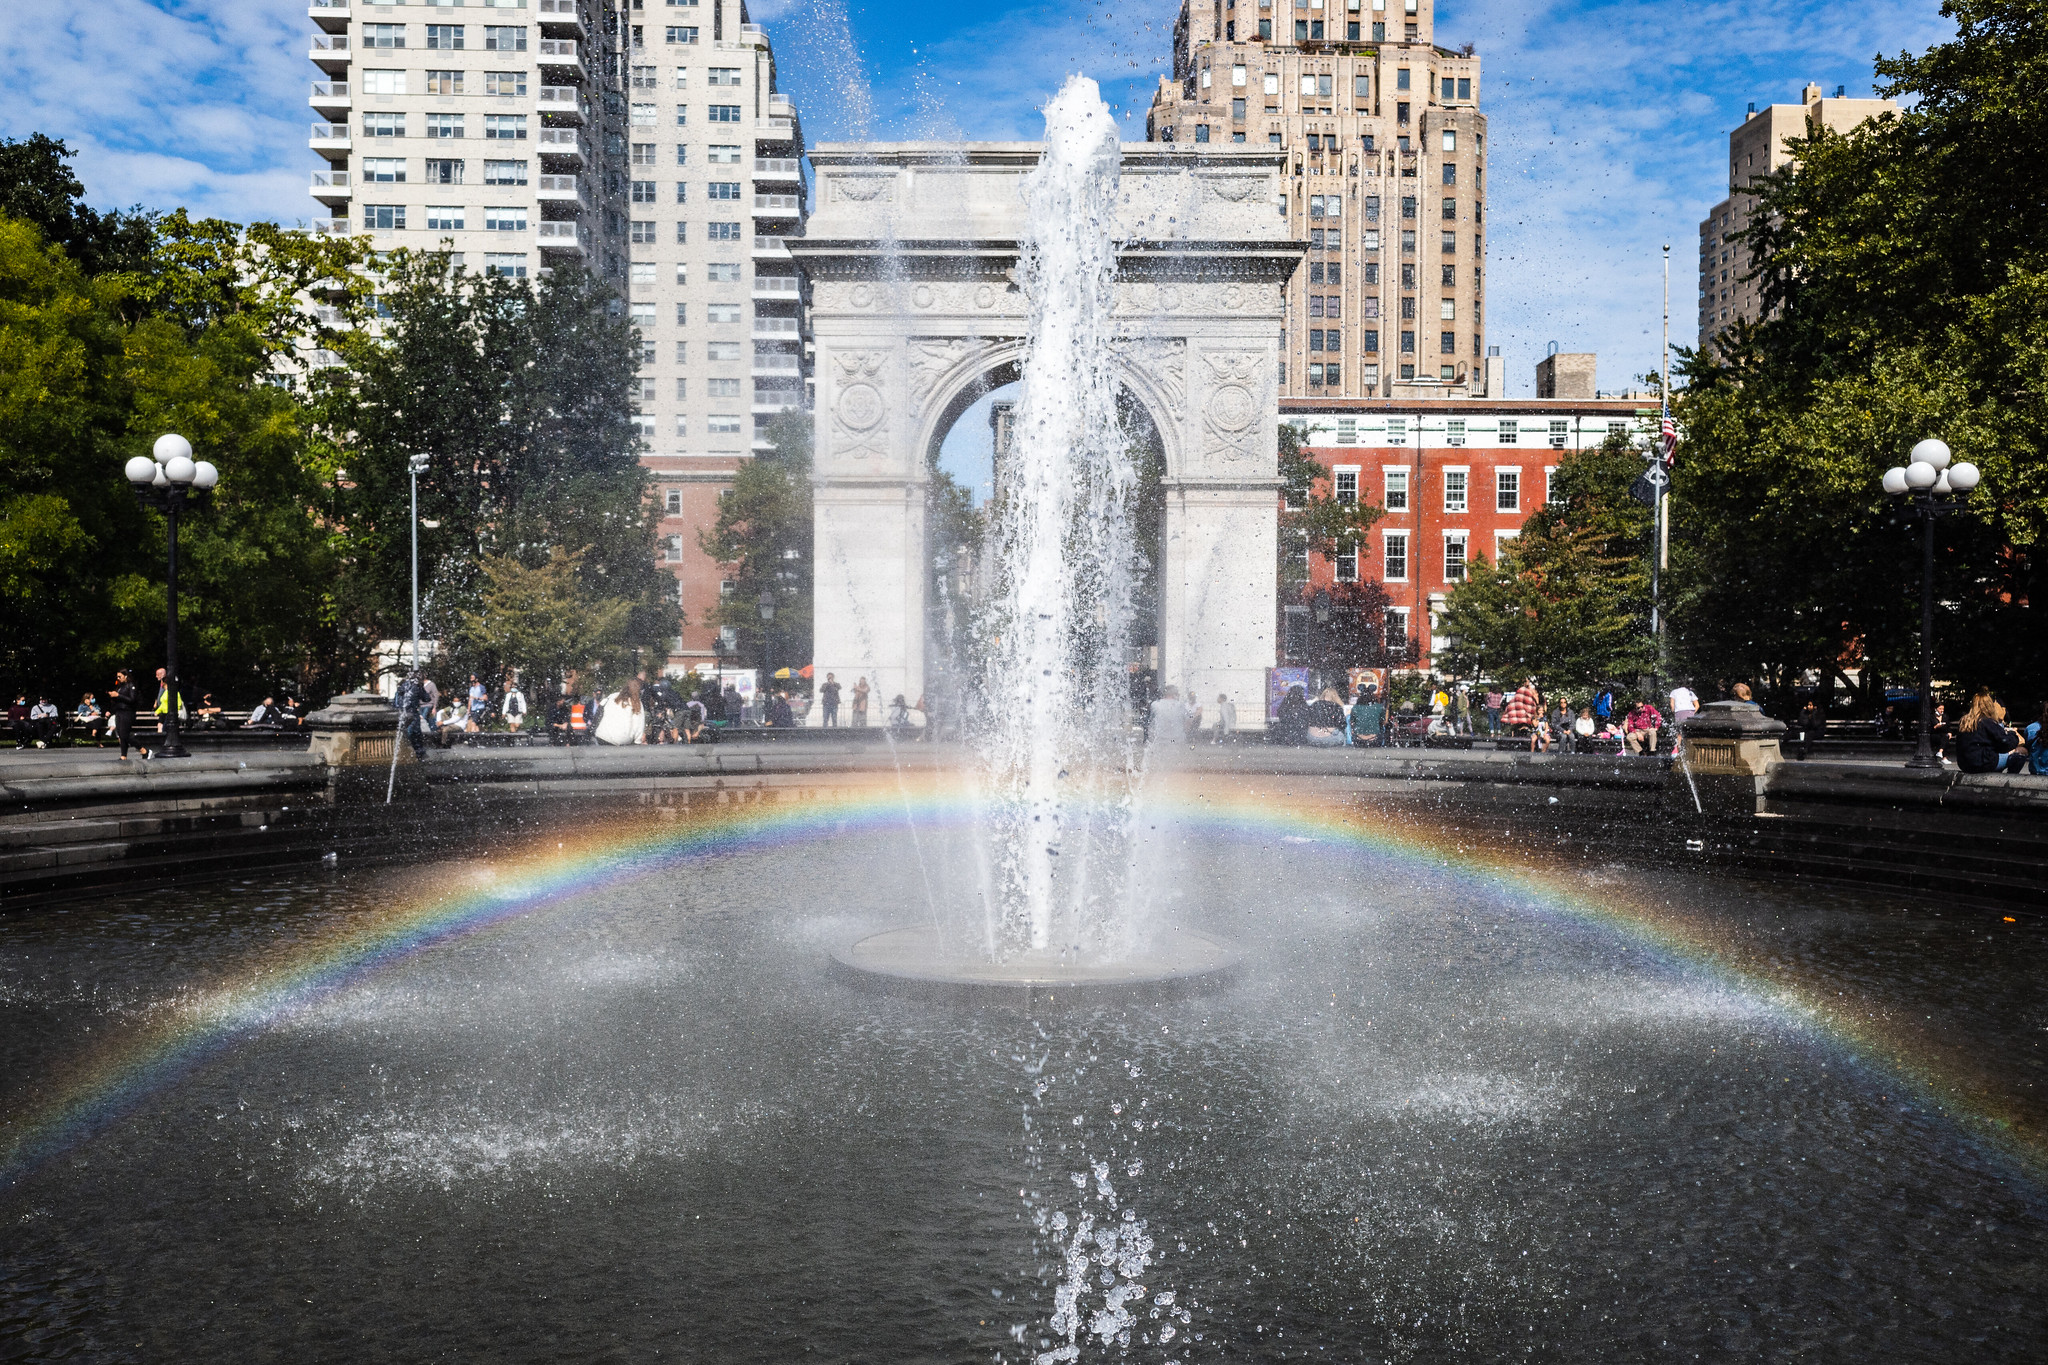 a rainbow appears in the fountain with the arch in the background